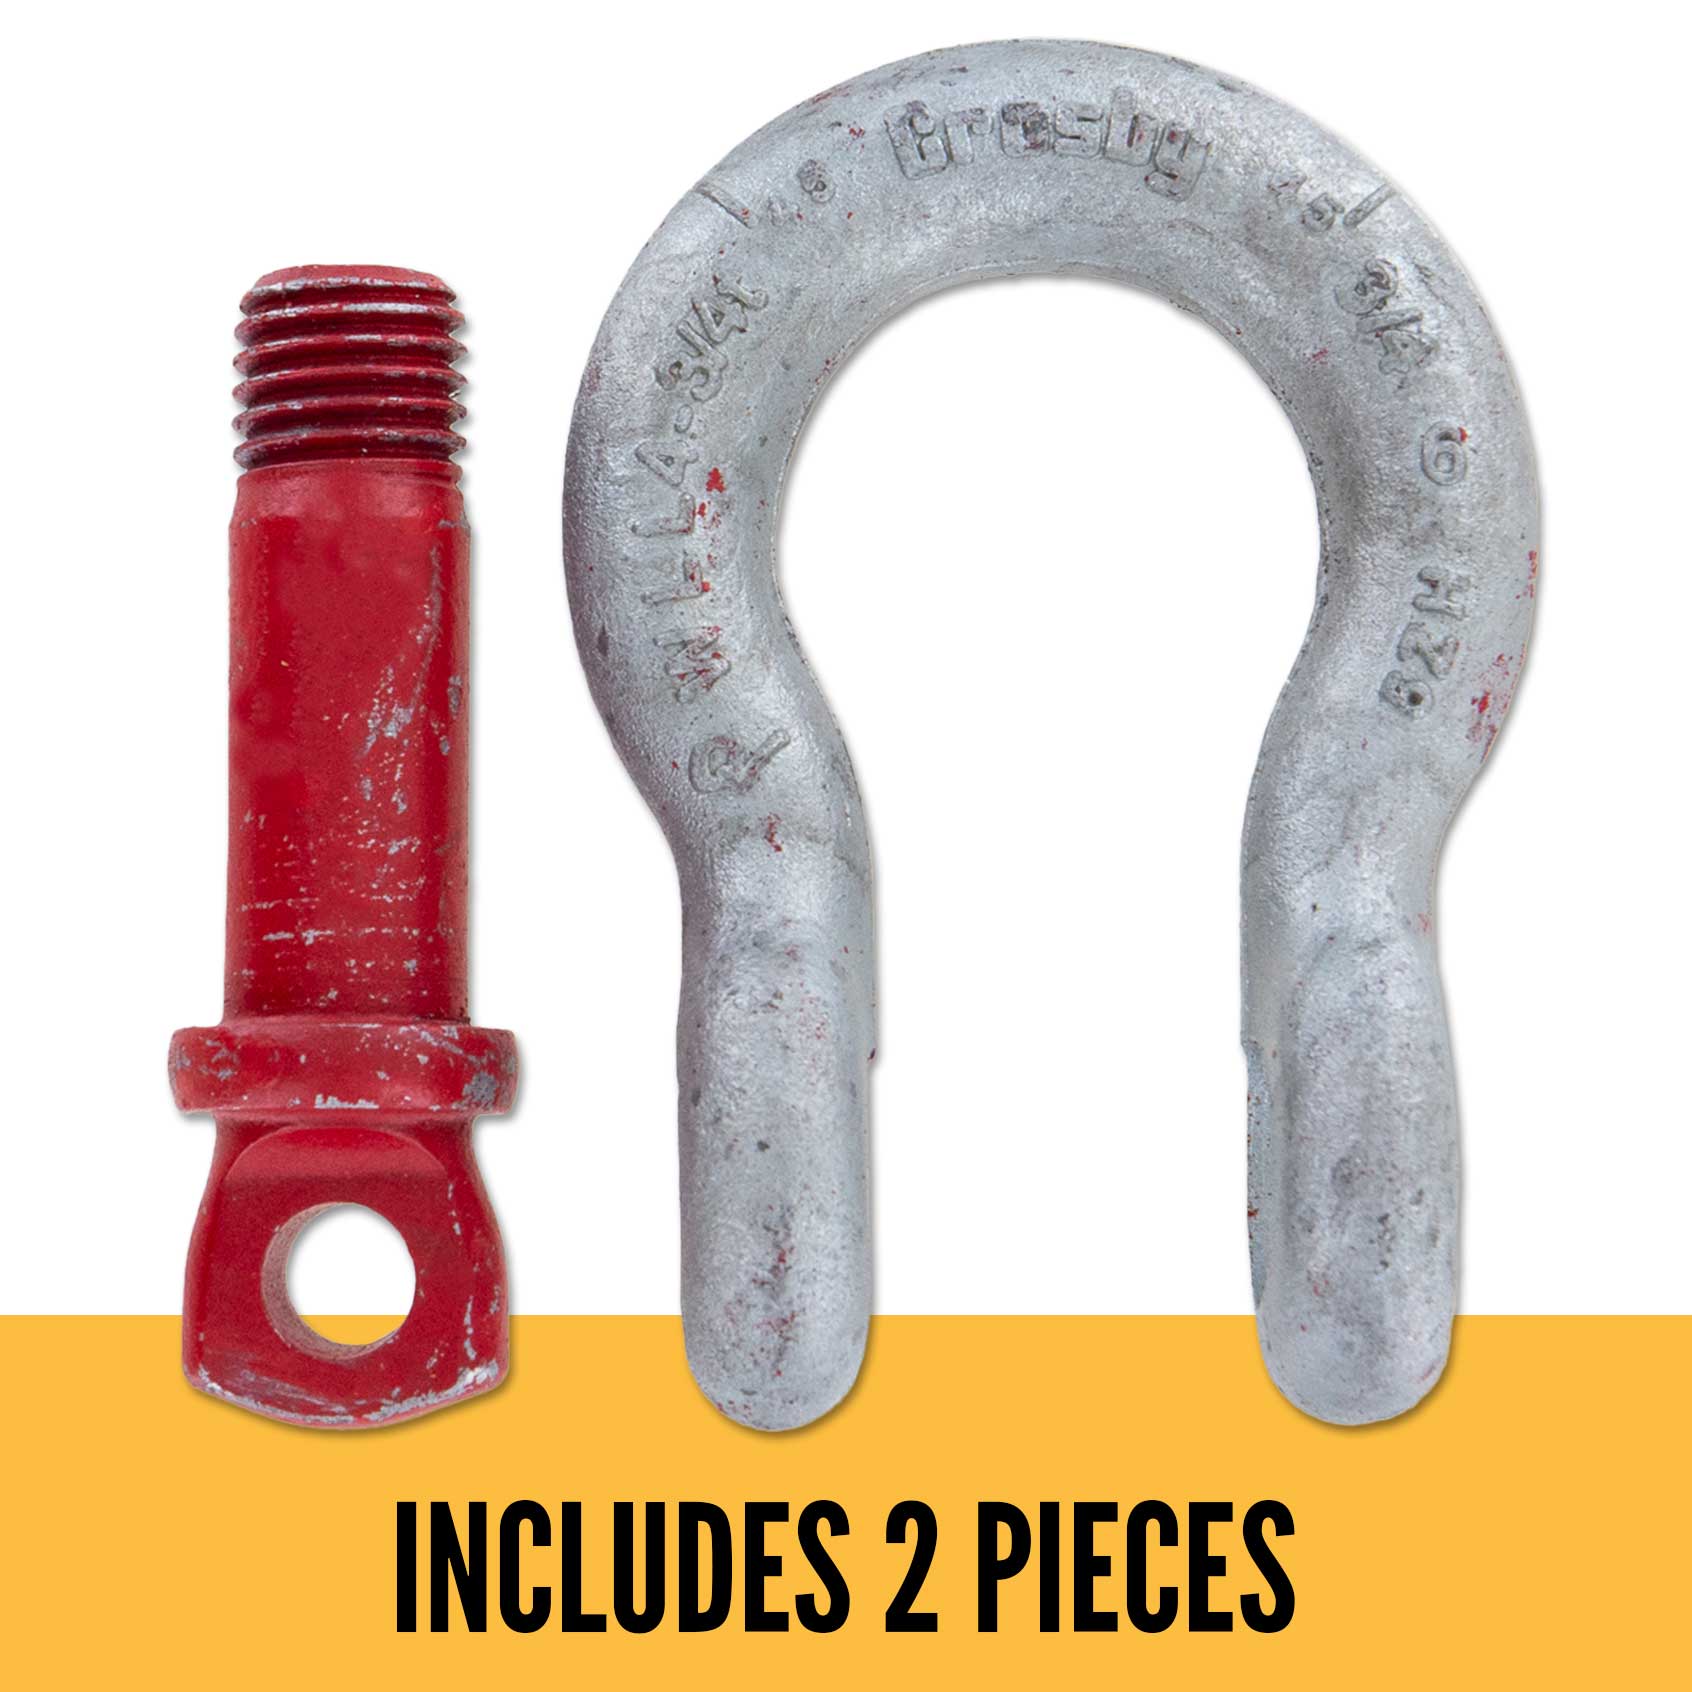 1-3/4" Crosby® Screw Pin Anchor Shackle | G-209 - 25 Ton parts of a shackle